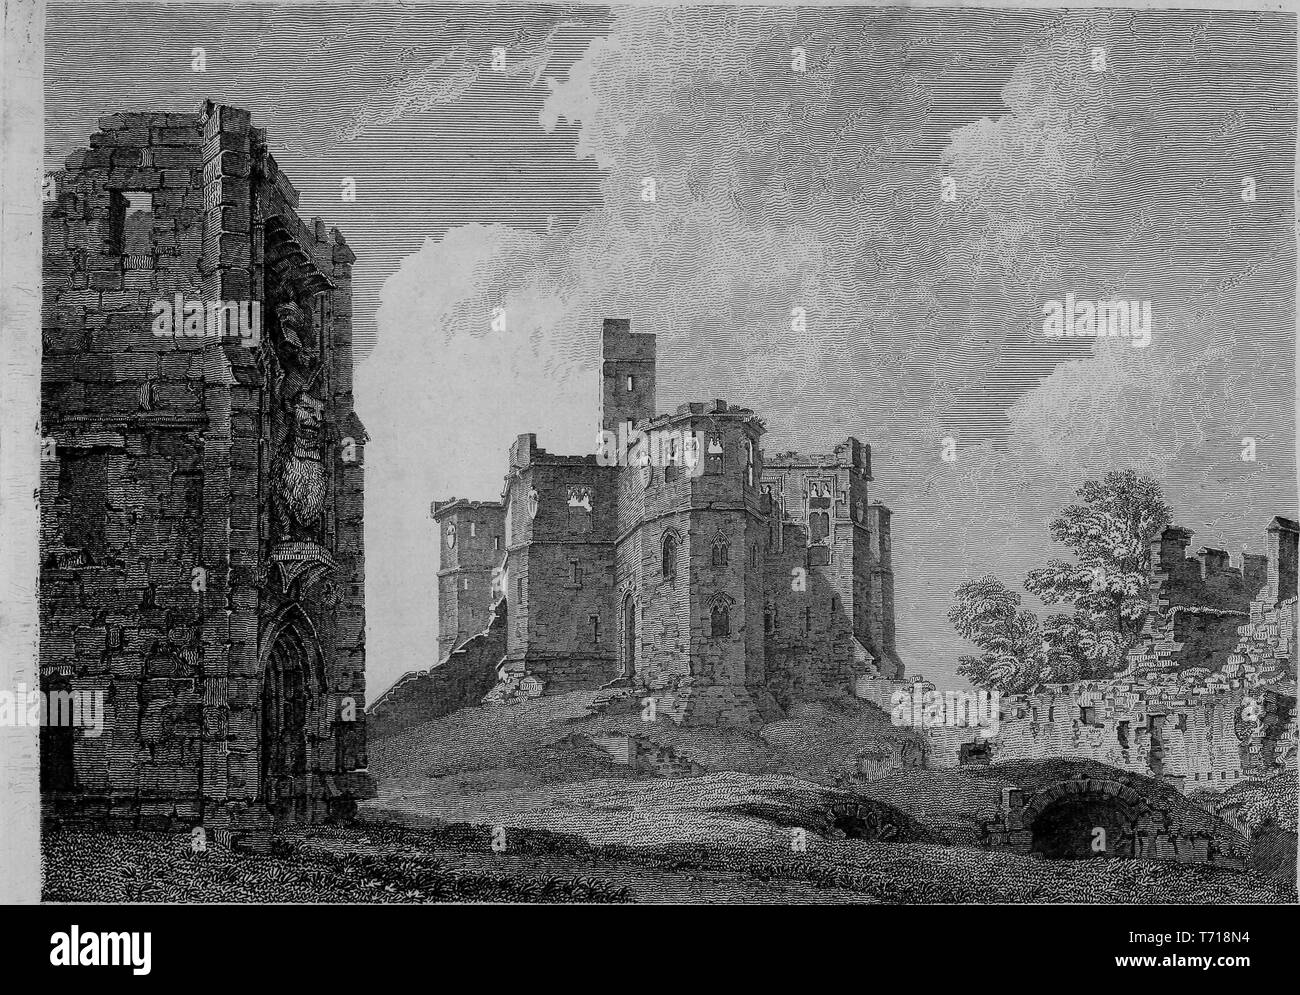 Engraving of the Warkworth Castle in Northumberland, England, from the book 'Antiquities of Great Britain' by William Byrne and Thomas Hearne, 1825. Courtesy Internet Archive. () Stock Photo